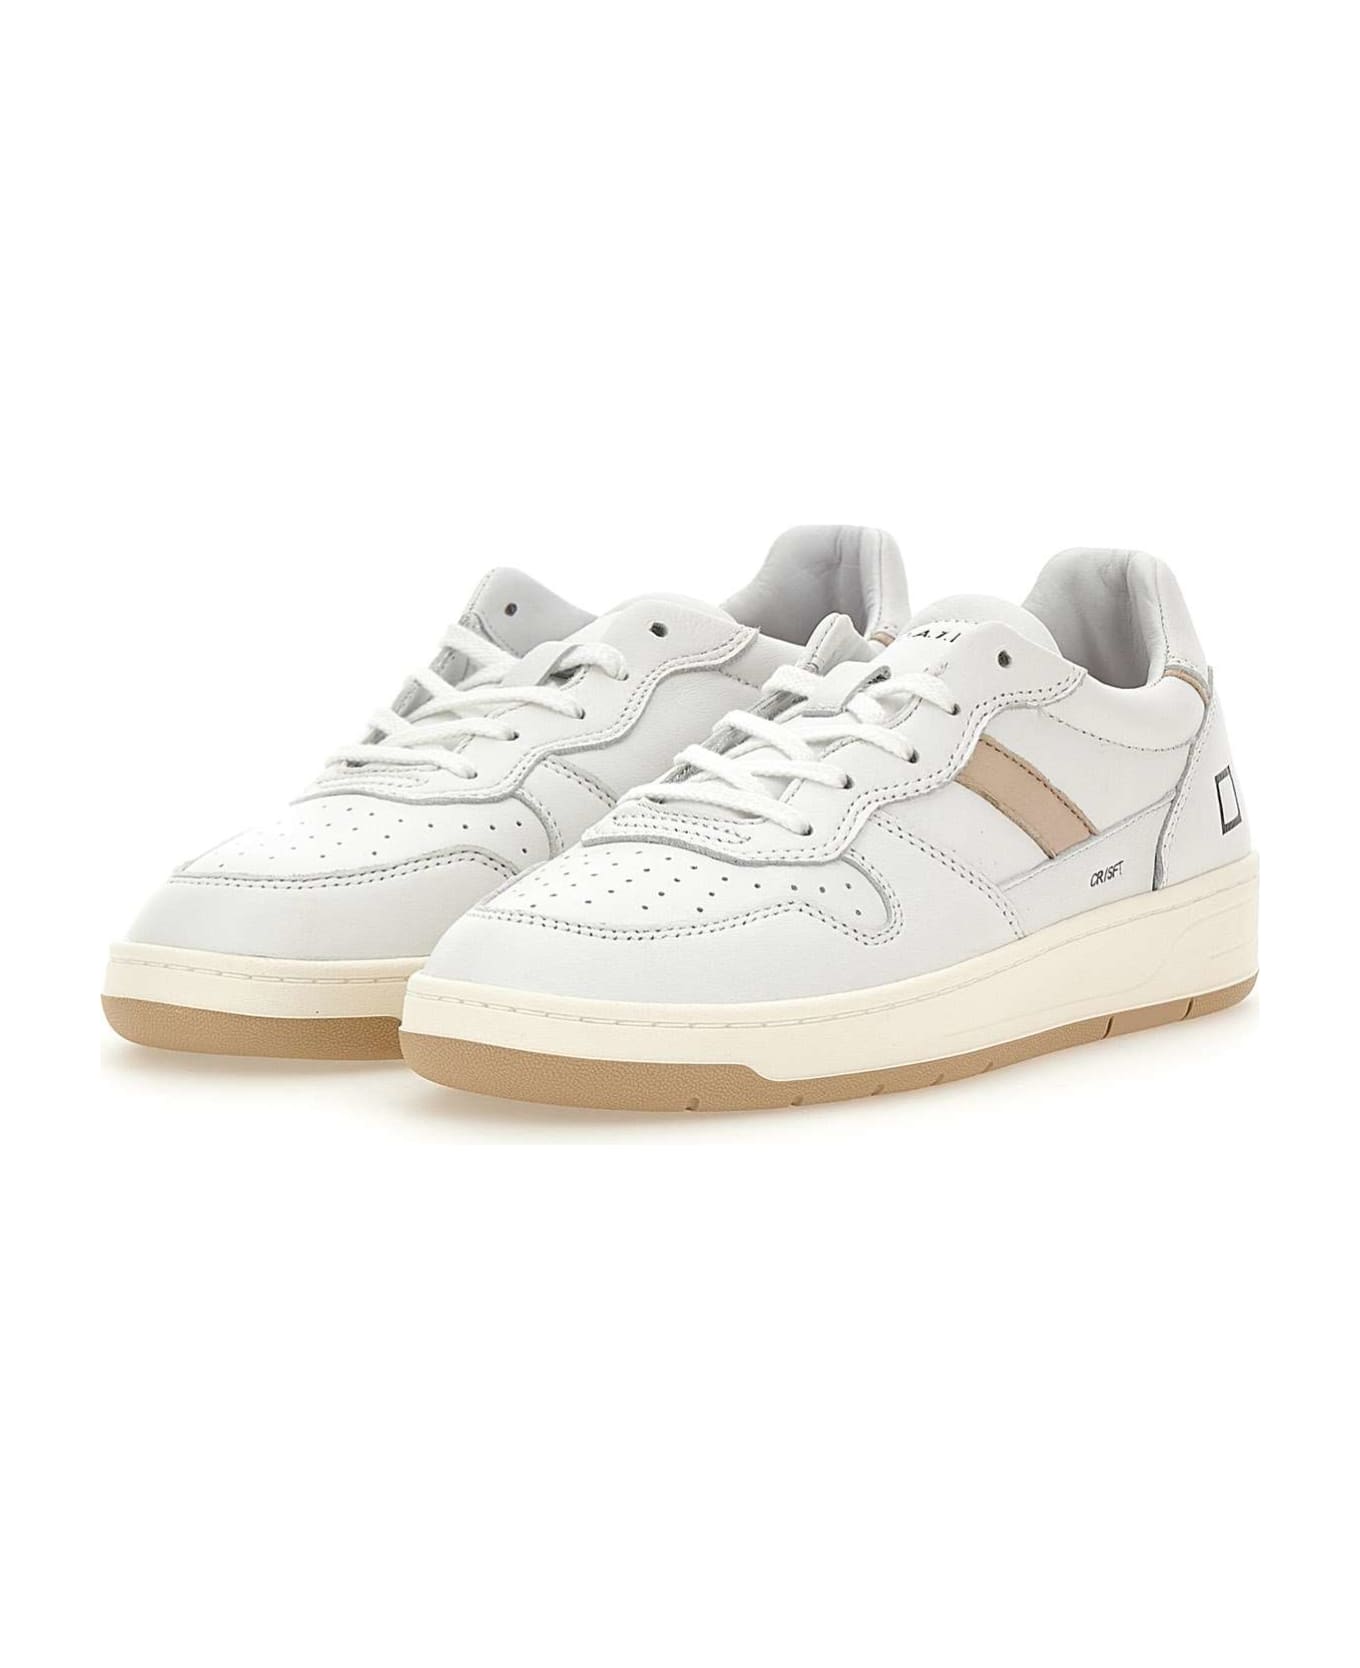 D.A.T.E. "court 2.0 Soft" Leather Sneakers - WHITE